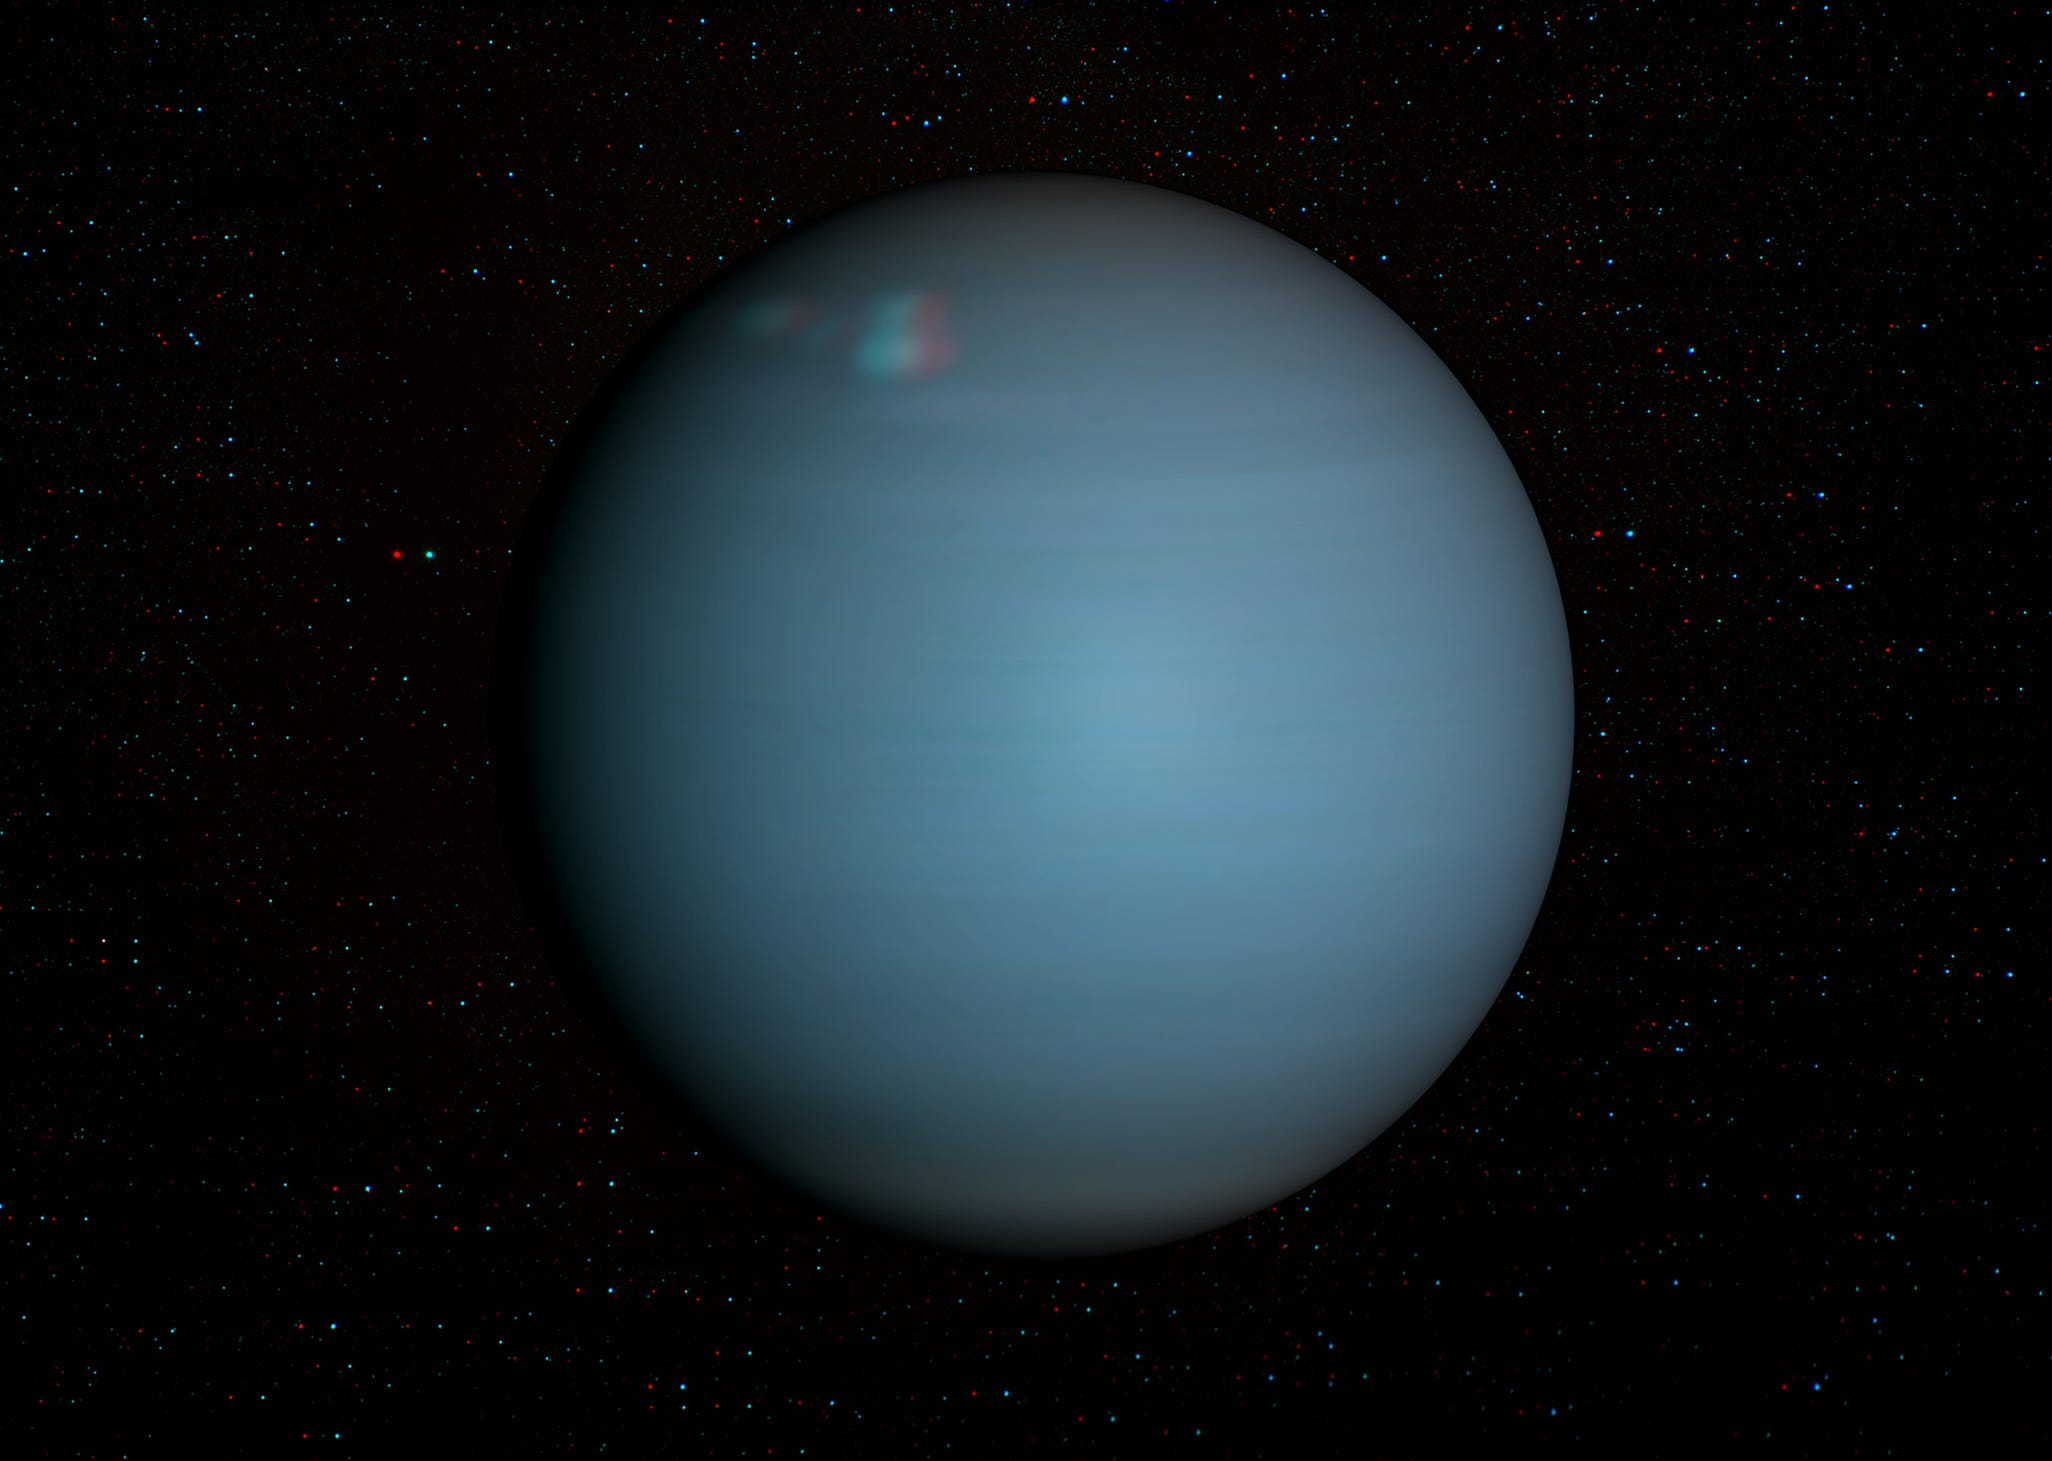 See Uranus with your naked eye this week